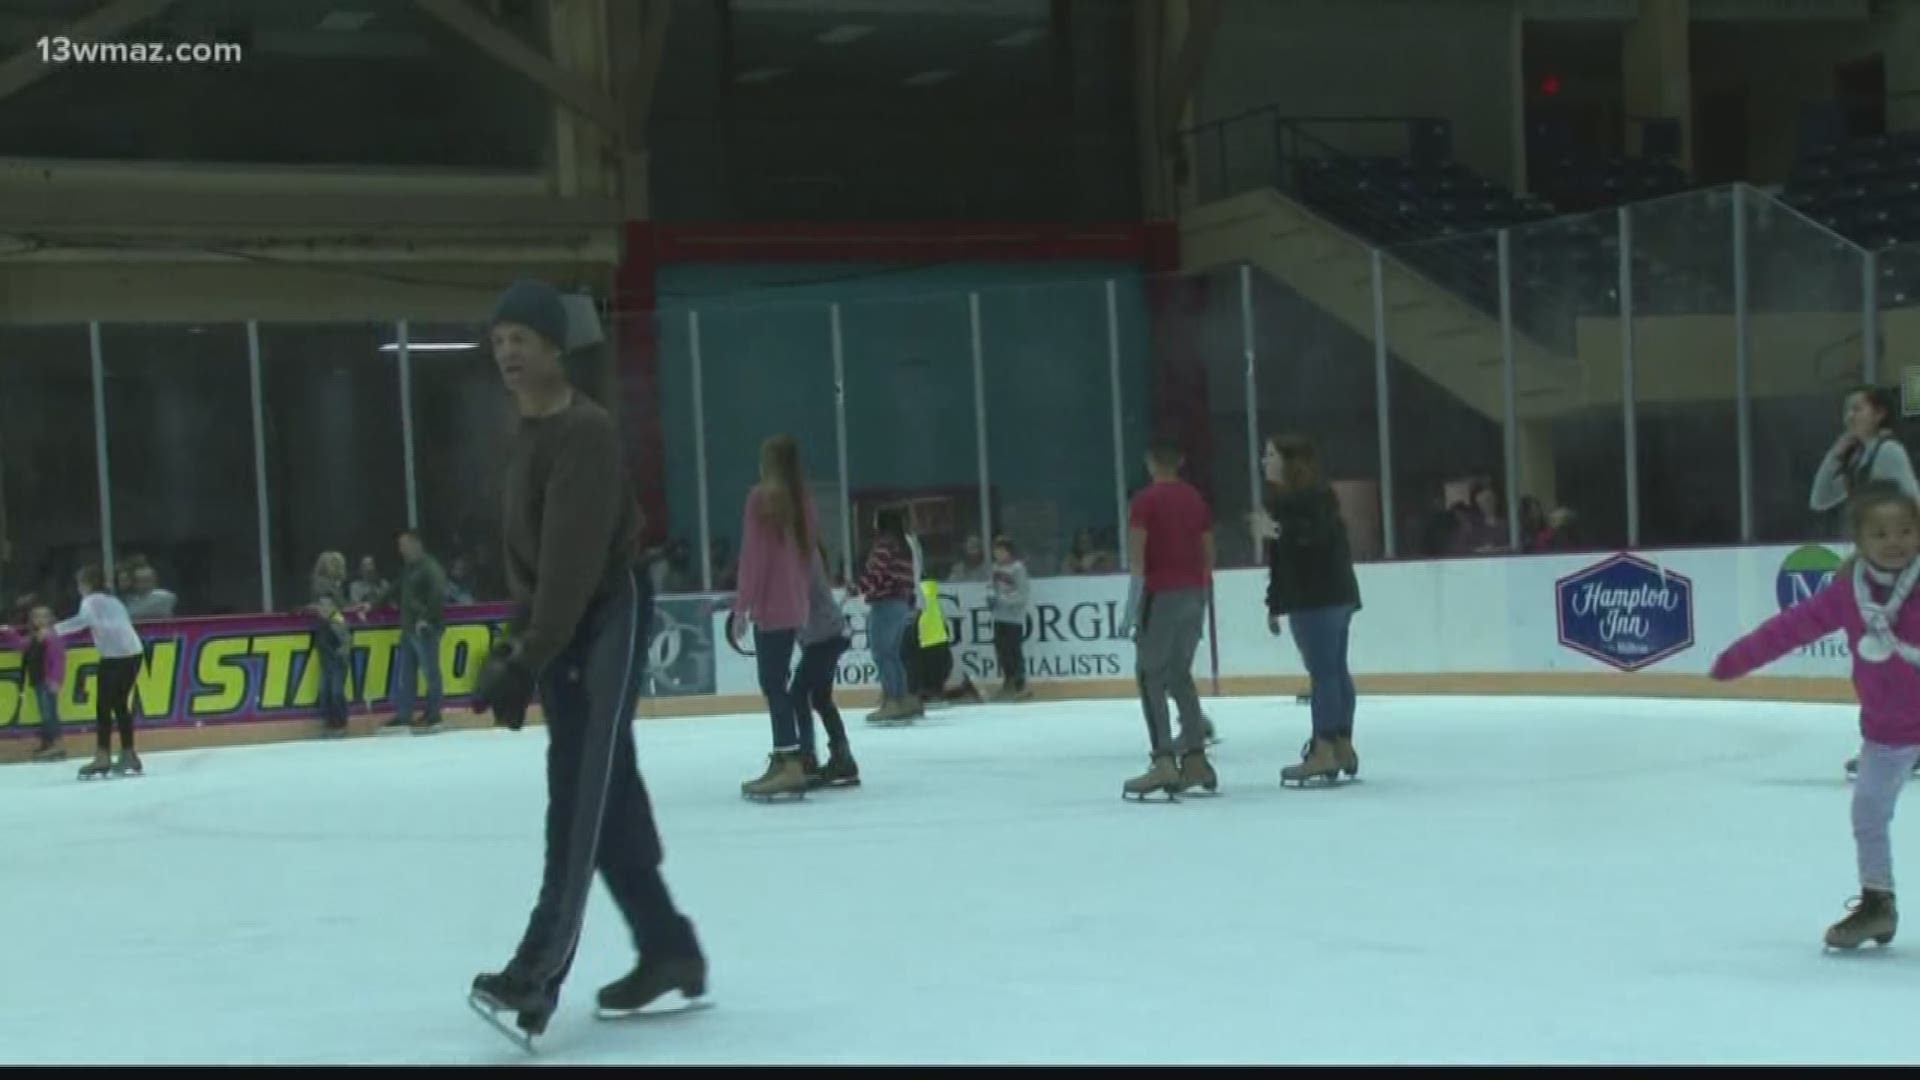 If you haven't been ice skating yet, don't worry. Folks have until late February to hit the ice.